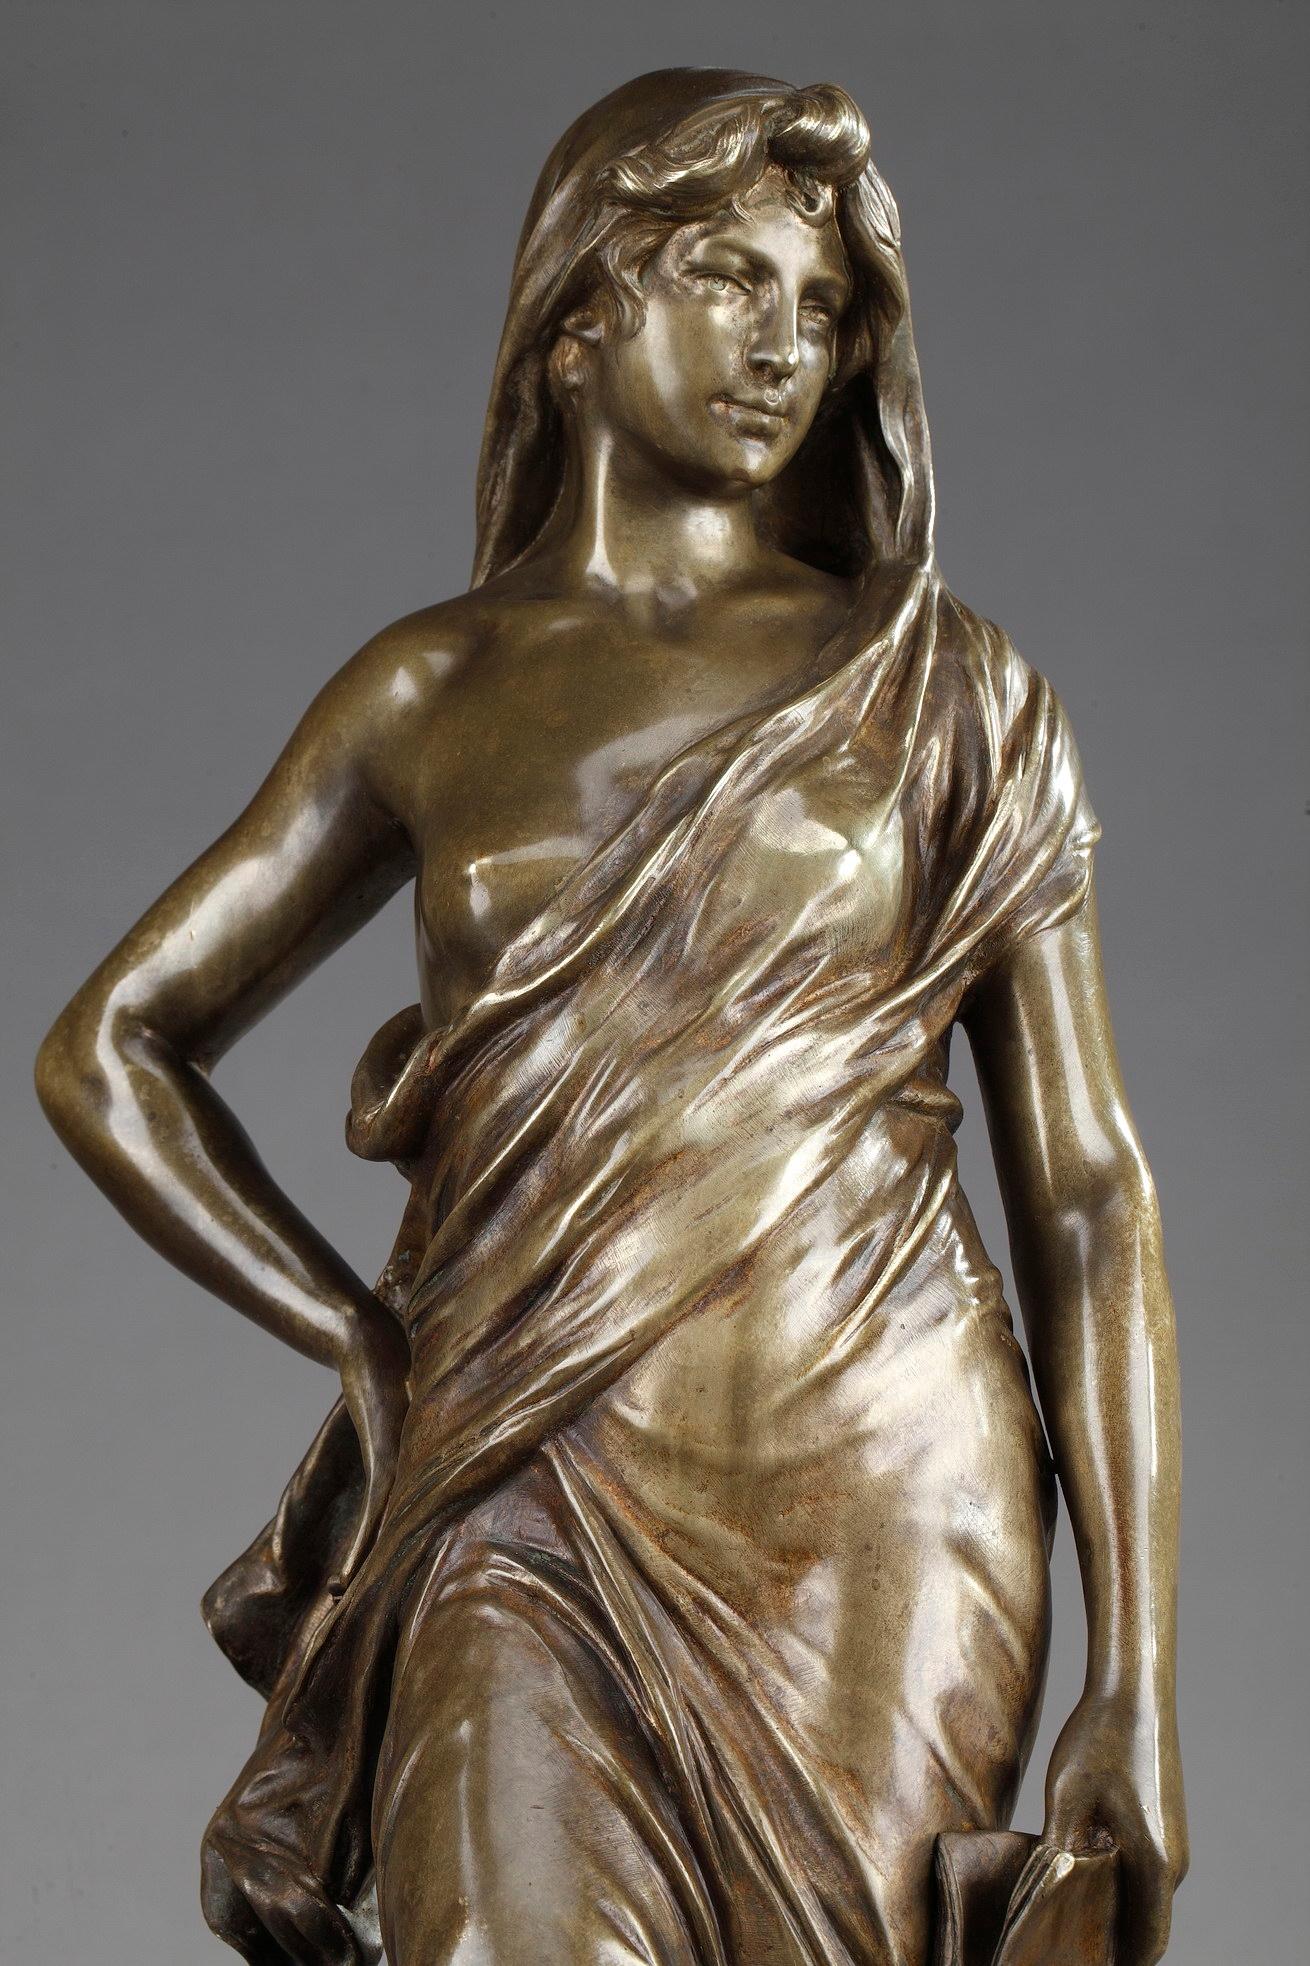 Bronze statue with gold patina featuring an allegory of Meditation. The young woman holds a book in one hand, while the other gently rests upon her hip. She is wearing a flowing dress which covers partially her head and breast. This sculpture boasts